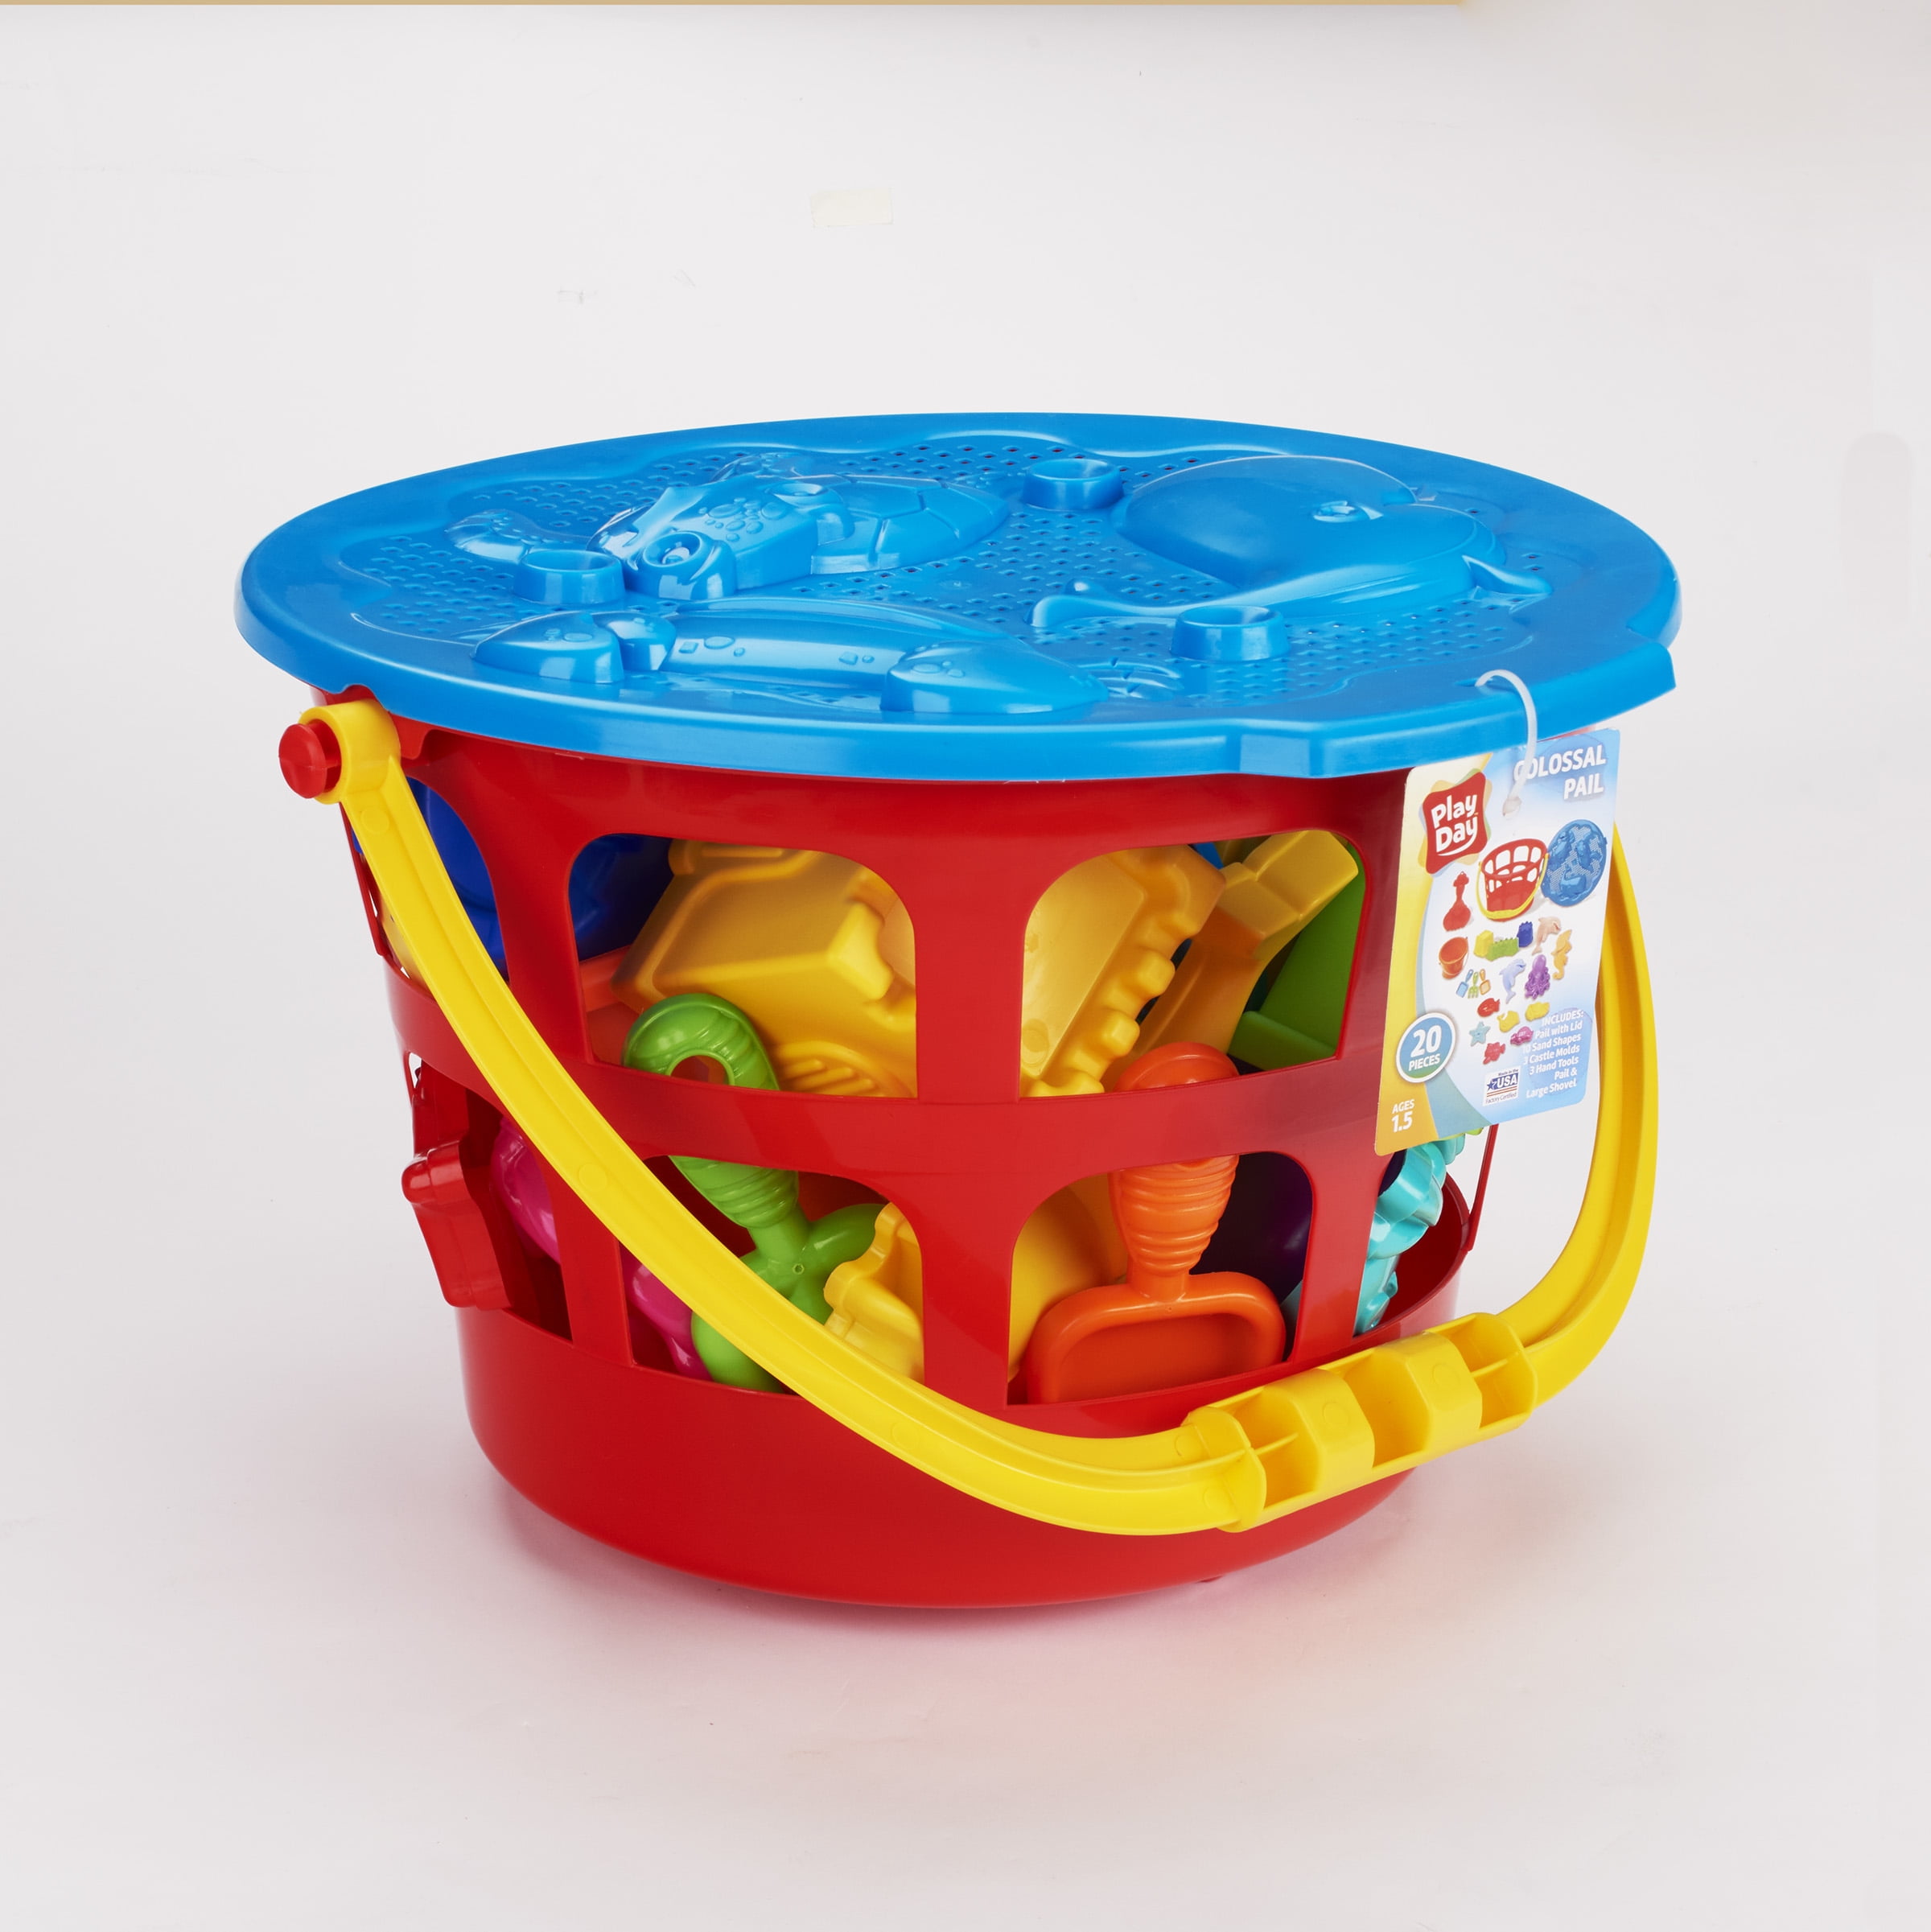 Playbees Beach Sand Toy Set, Includes 12 Sets,Buckets and Shovels,4.25  inches,Sand Castle Beach Mold Pails, Plastic Beach Buckets & Shovel Tools